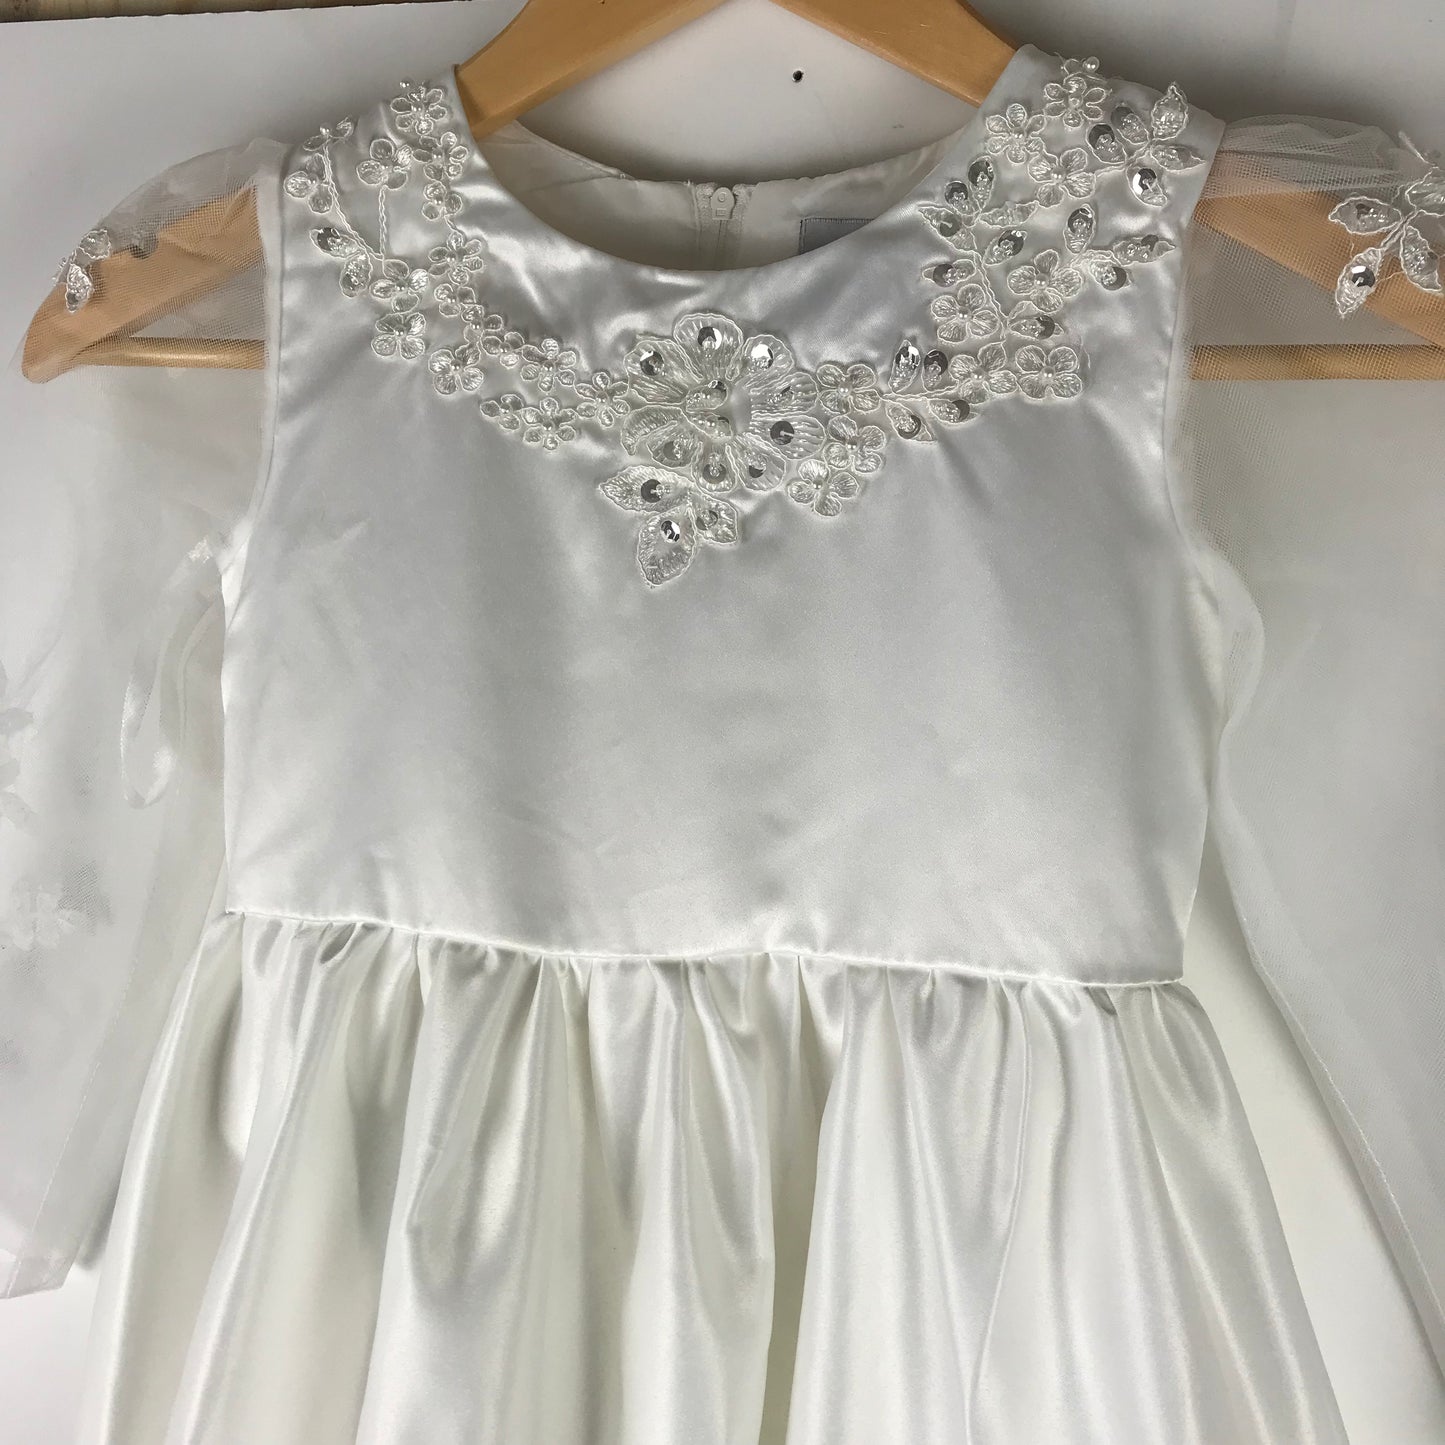 Mar-Lerino White Long Sleeve Sequin and Embroidery Formal Dress Age 6